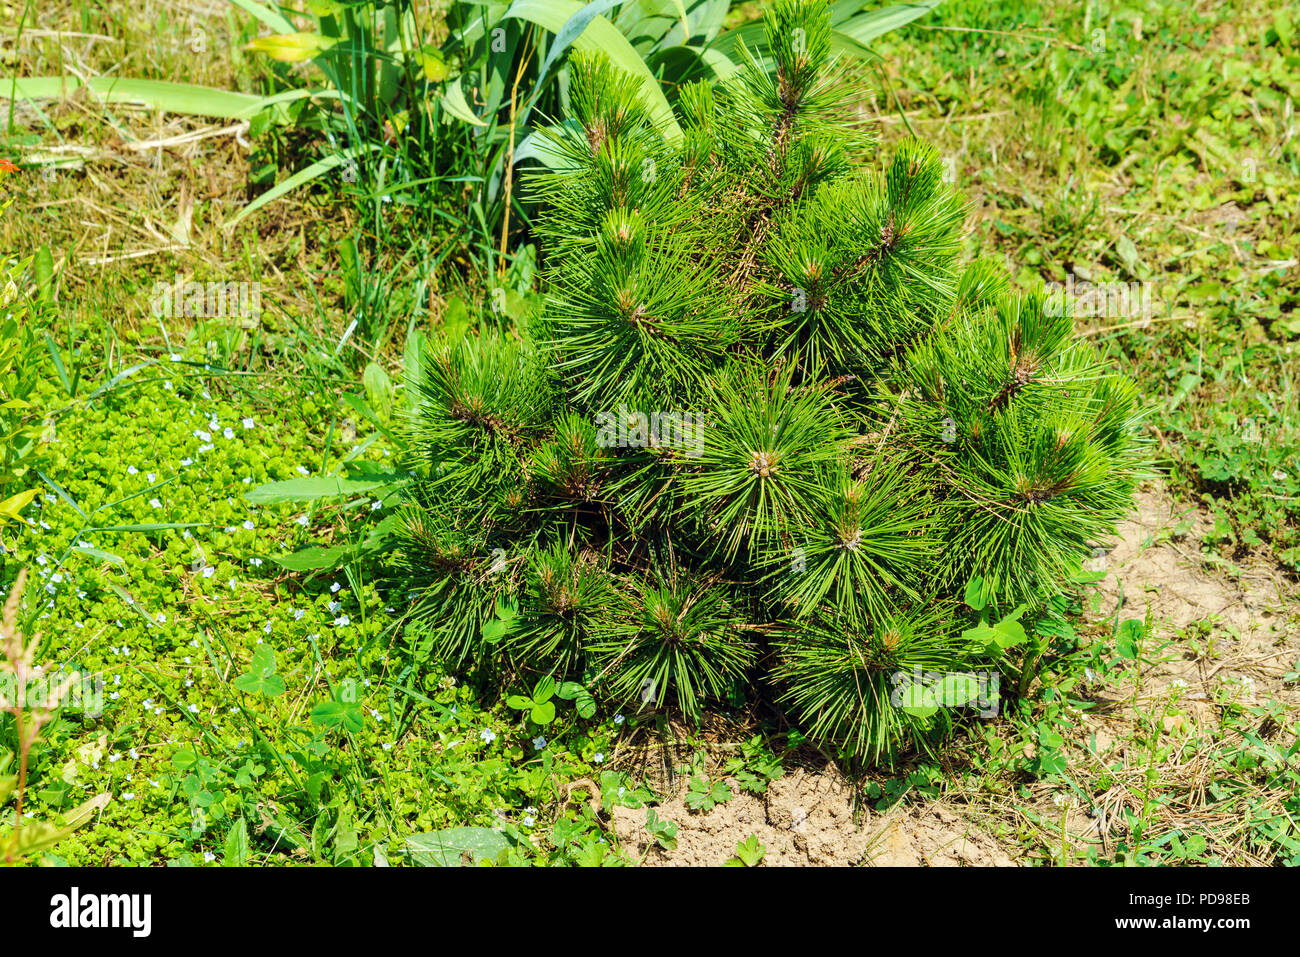 Young tree of mountain pine with green needles in the garden Stock Photo